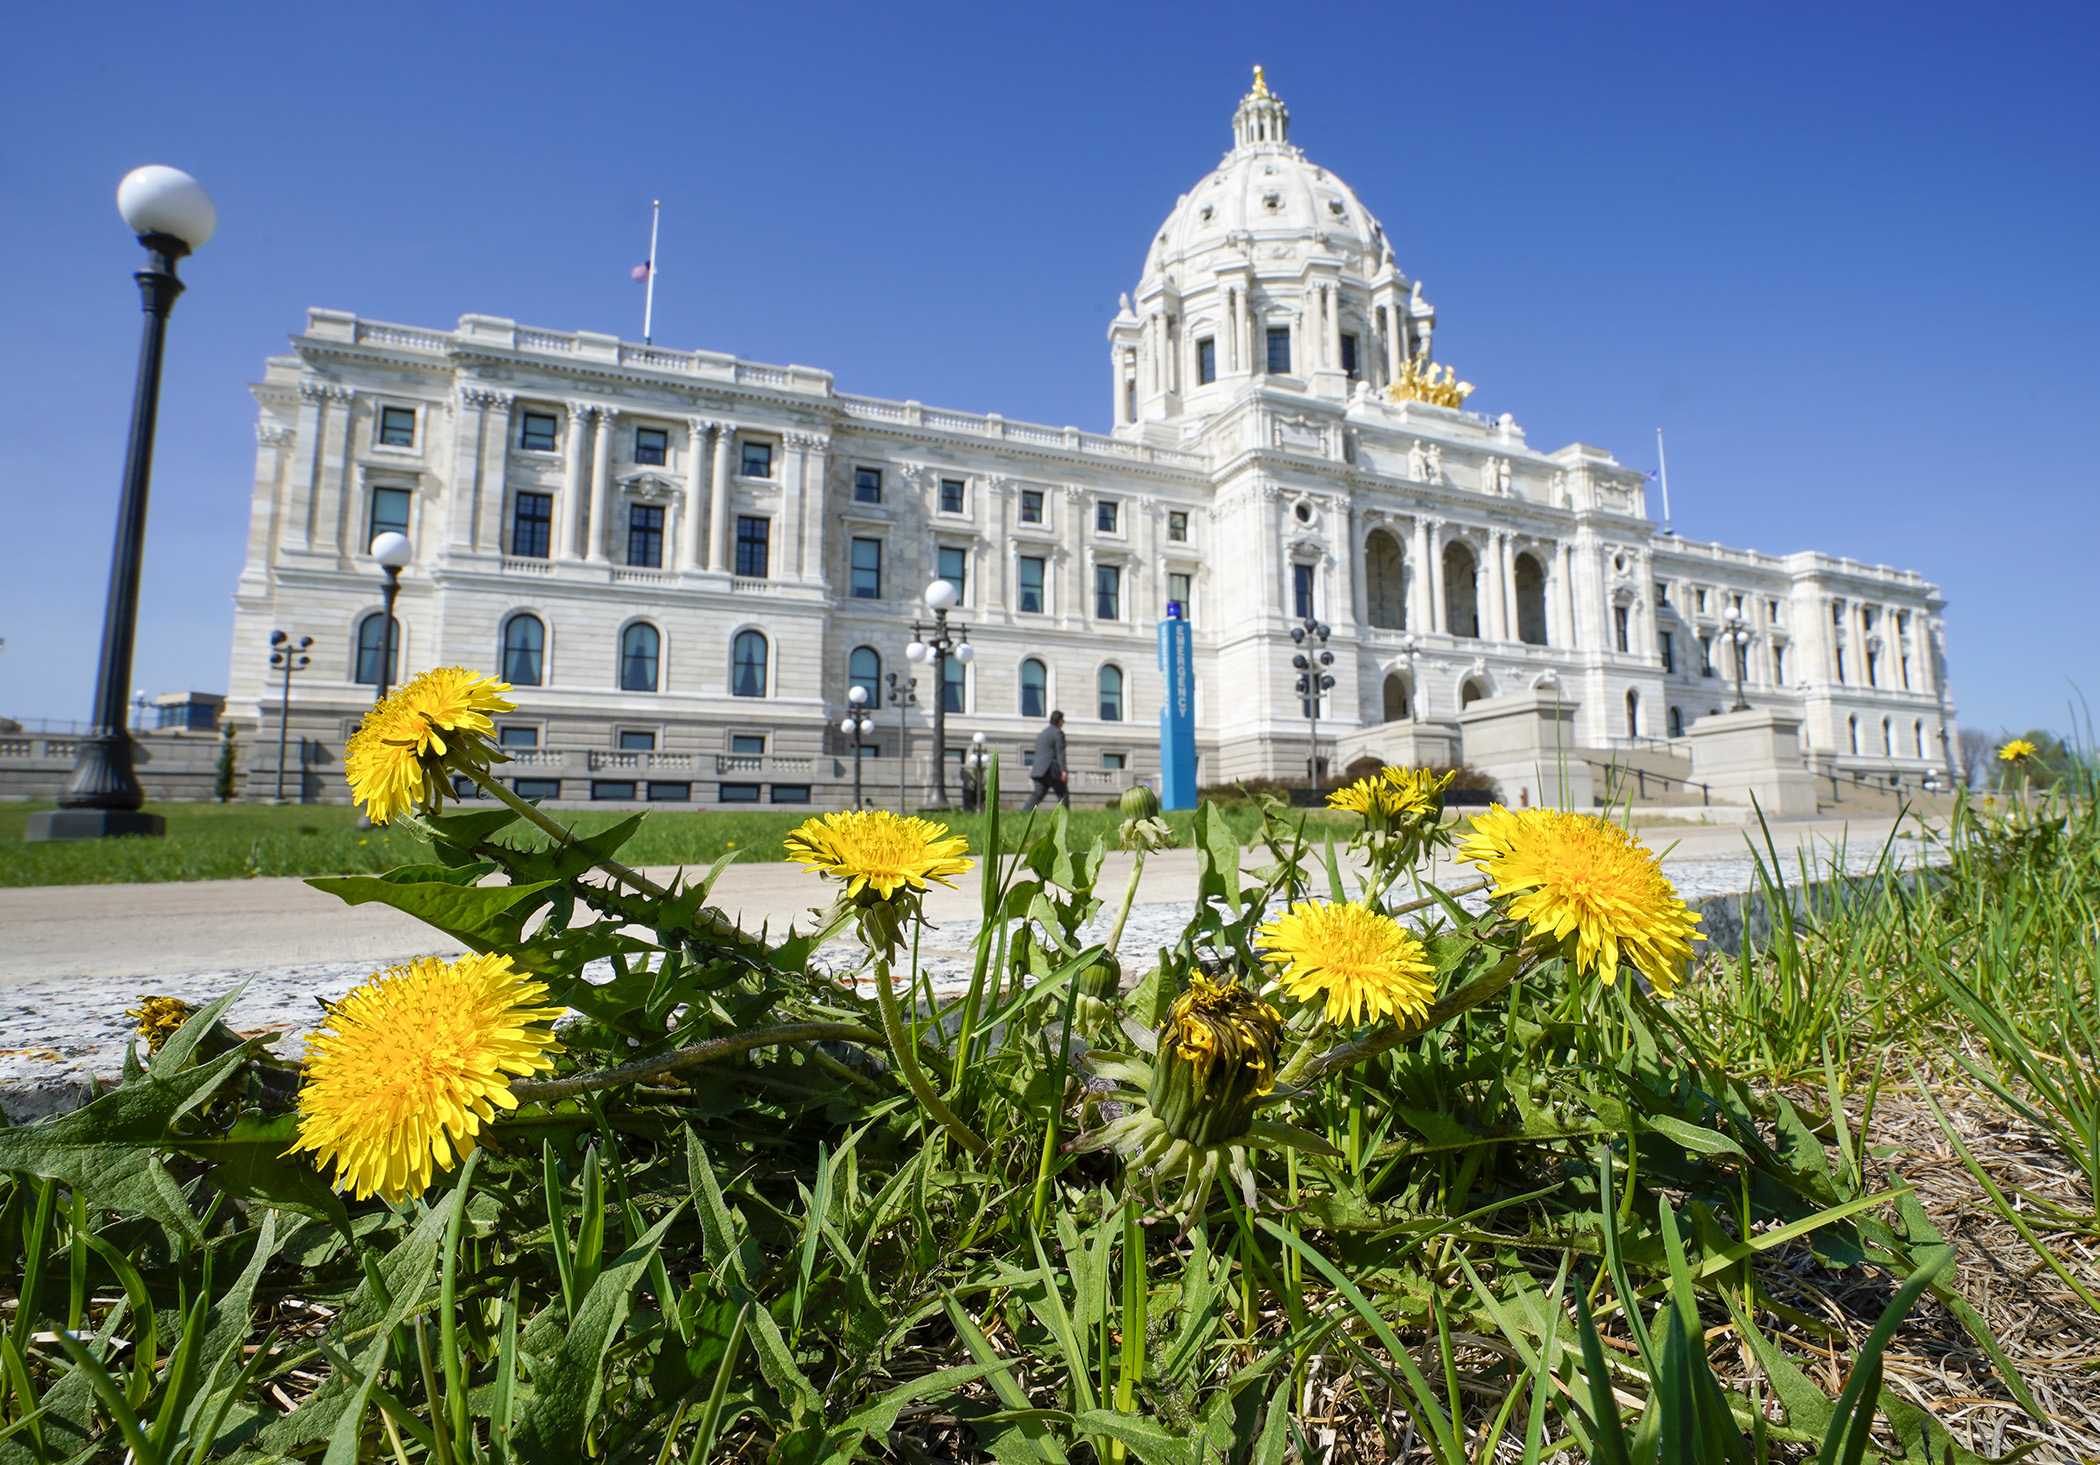 Dandelions spring up on the Capitol Mall, a sure sign of warmer weather May 12. (Photo by Paul Battaglia)